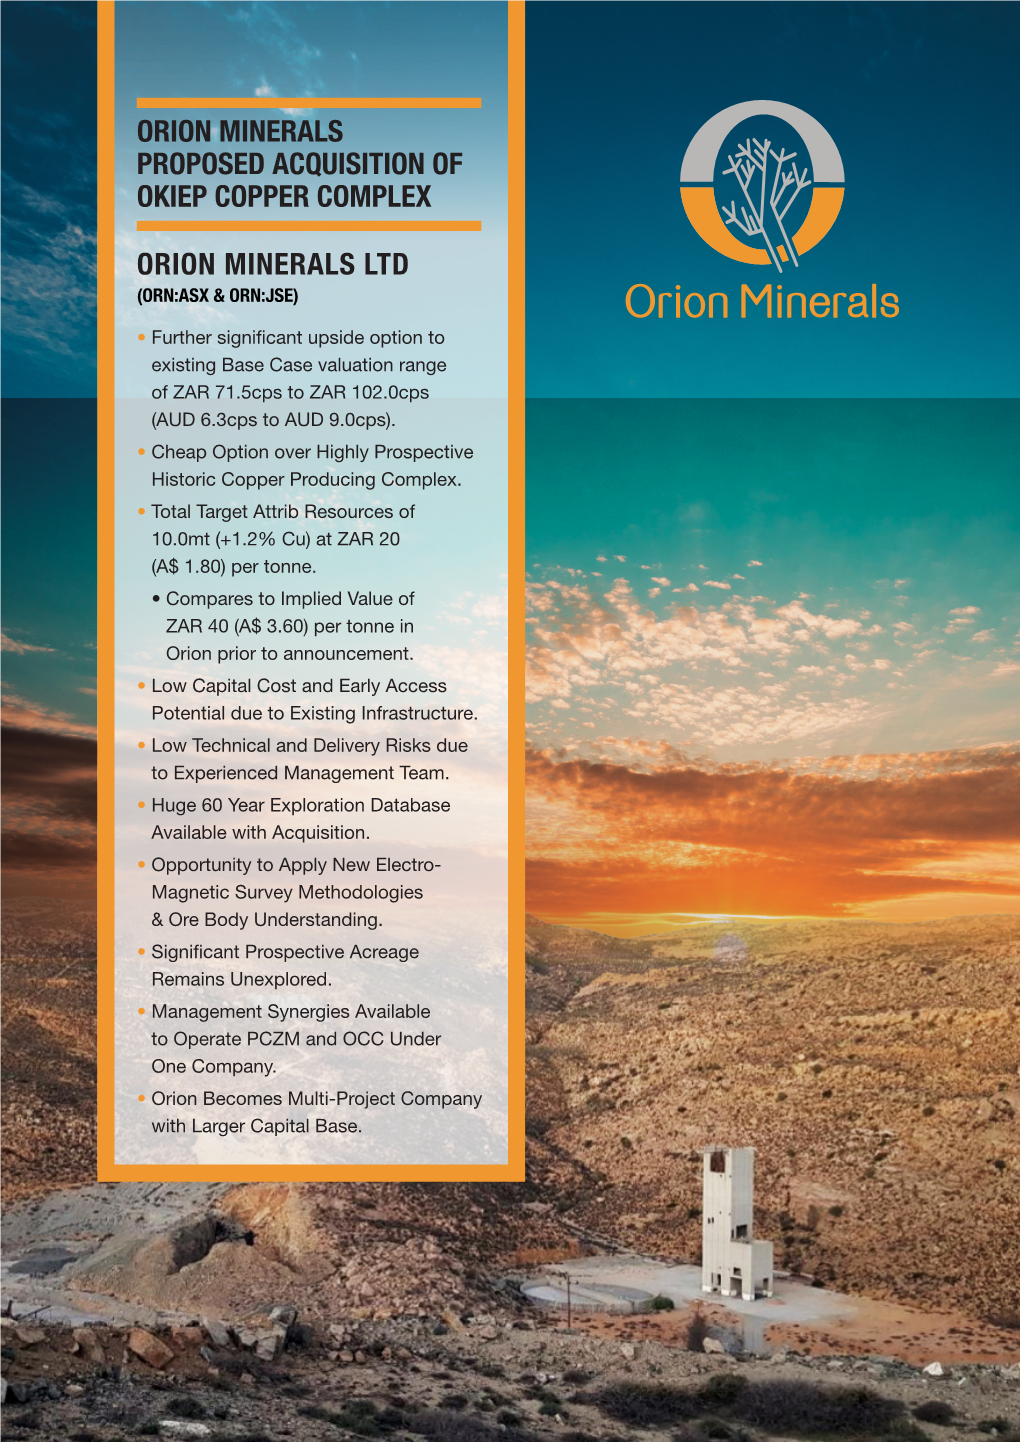 Orion Minerals Proposed Acquisition of Okiep Copper Complex